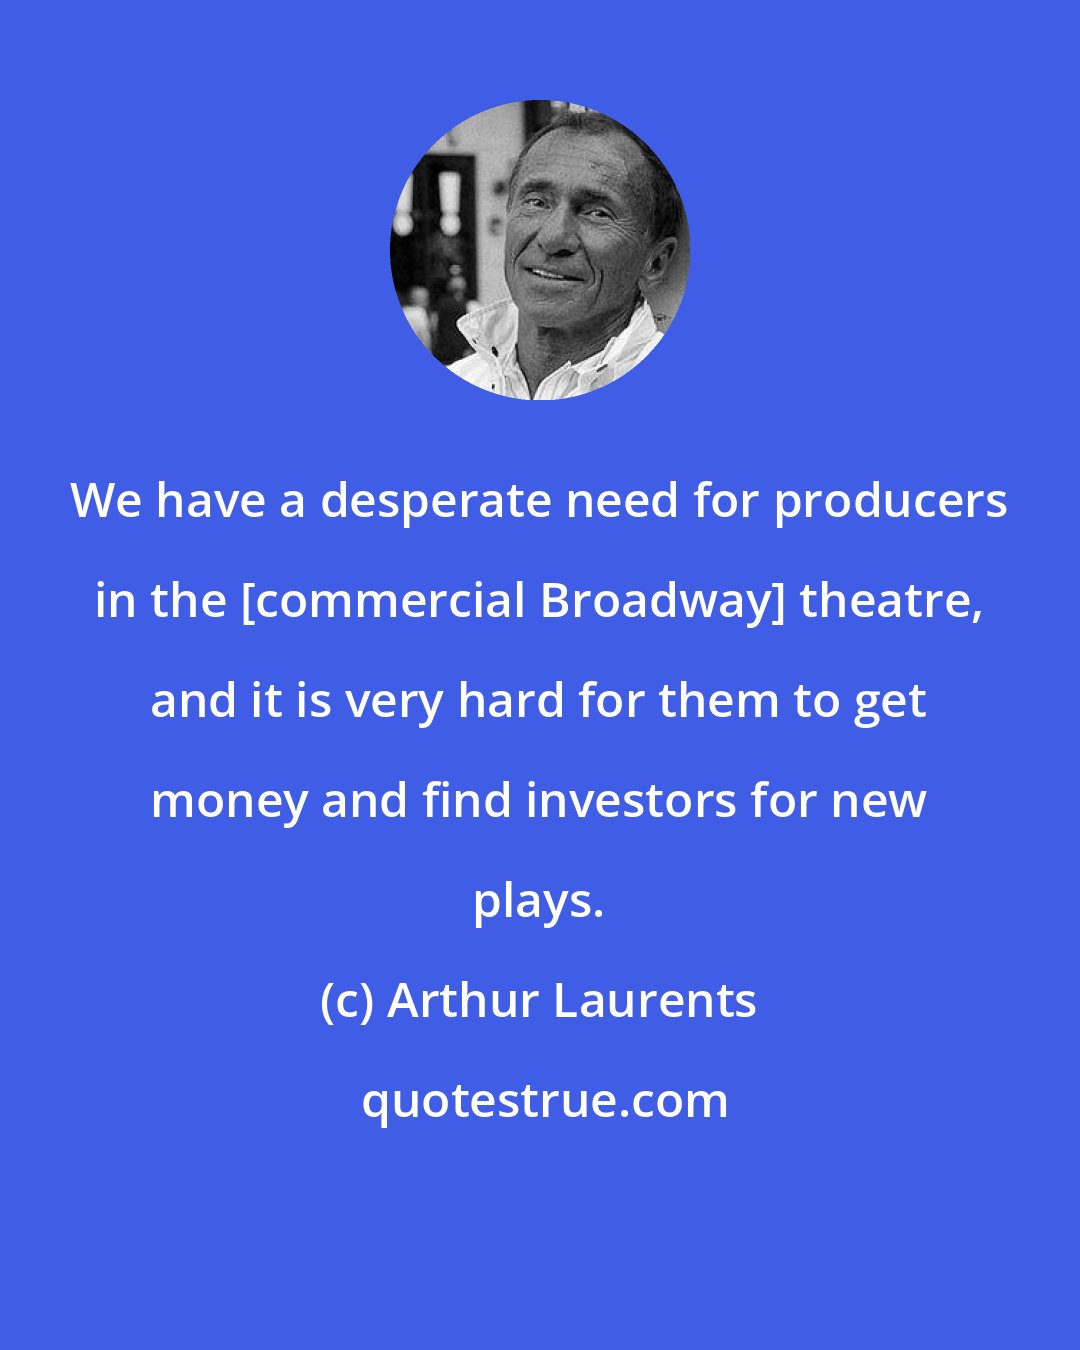 Arthur Laurents: We have a desperate need for producers in the [commercial Broadway] theatre, and it is very hard for them to get money and find investors for new plays.